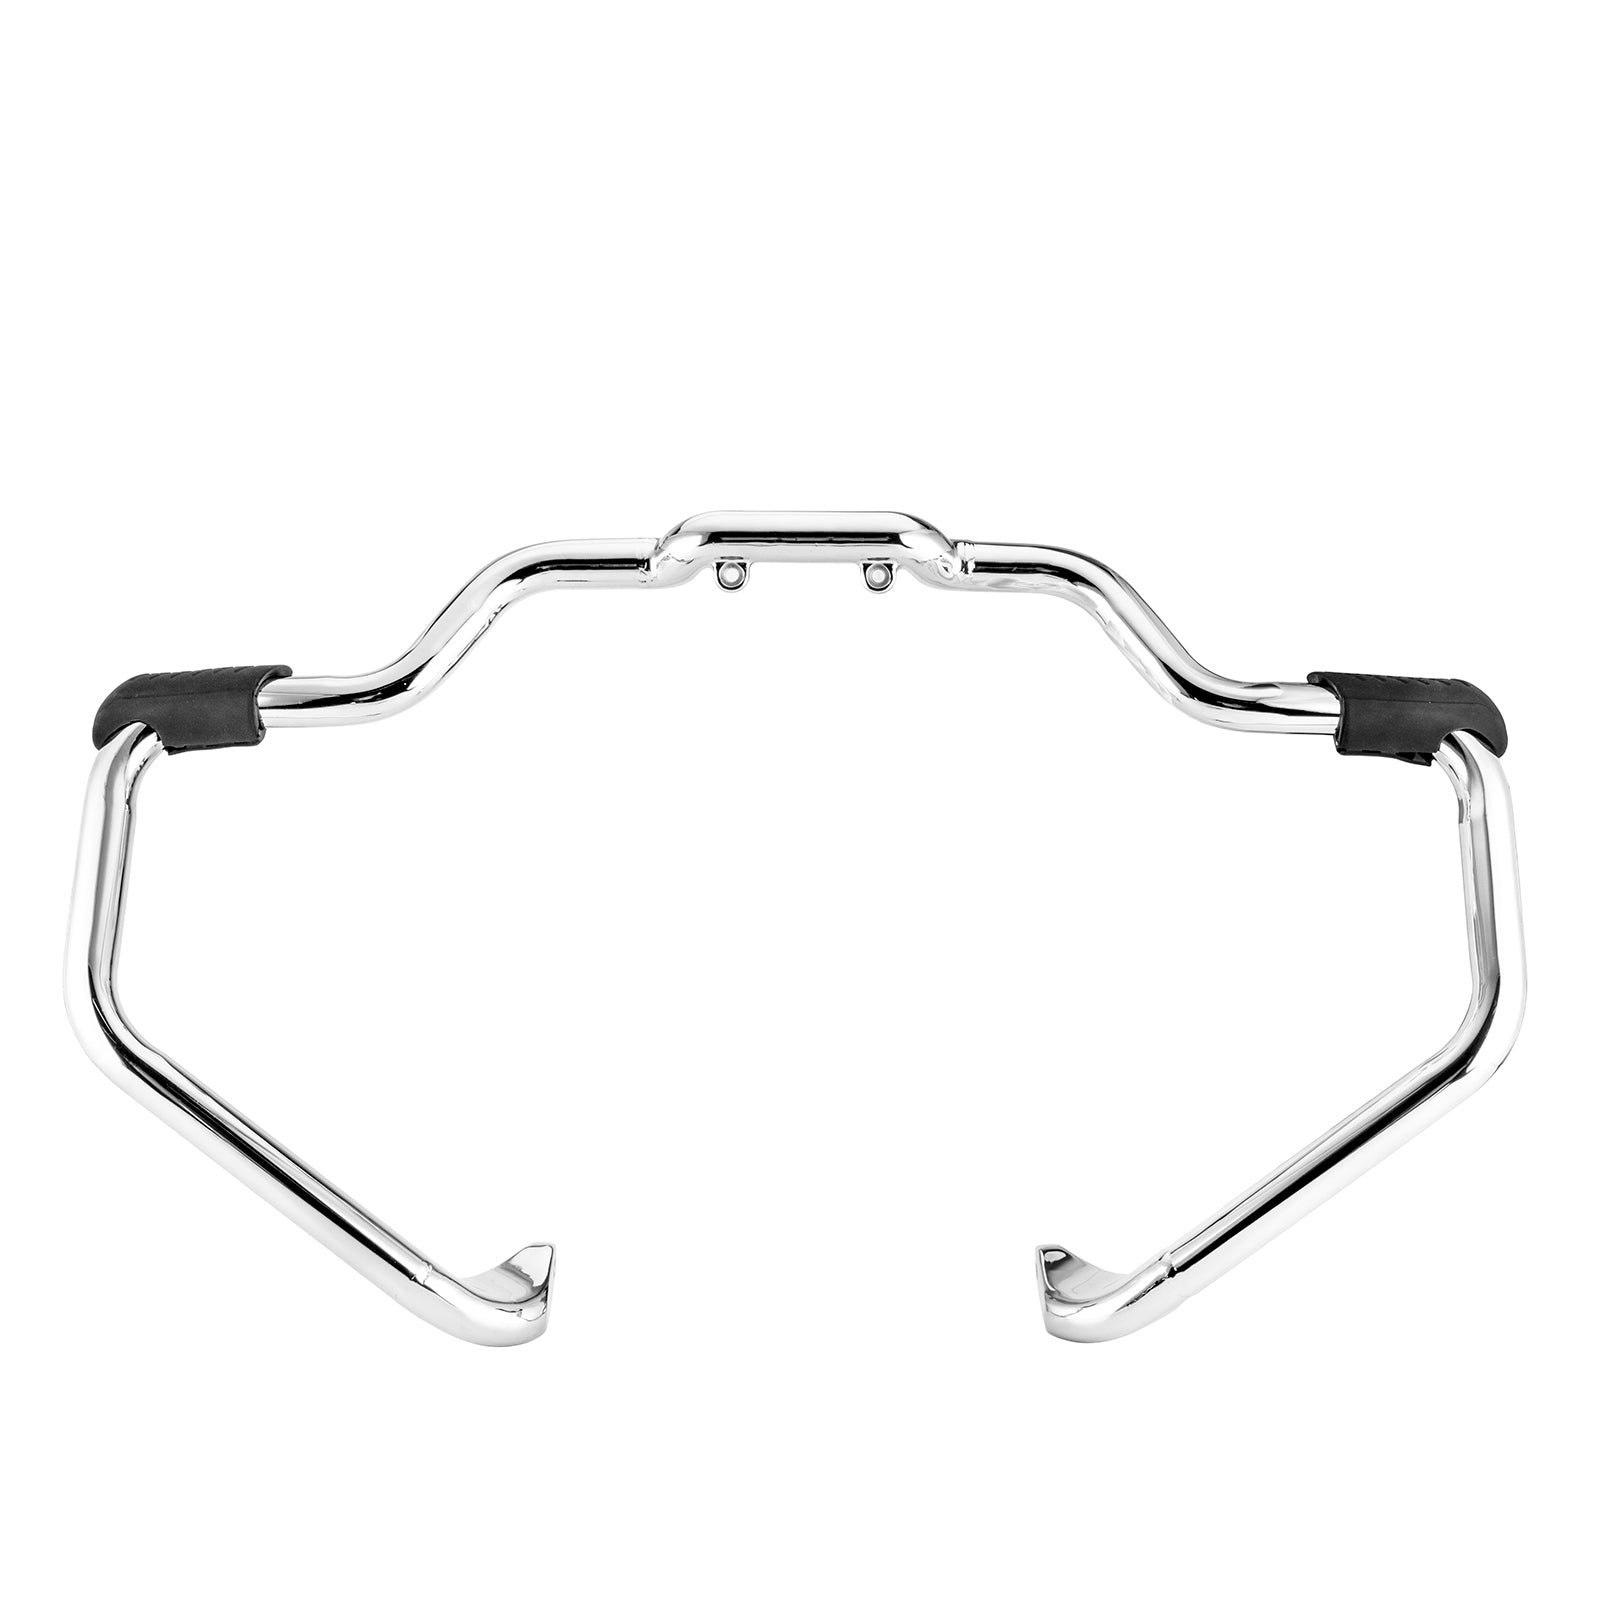 Buy chrome-silver Indian Chief Chieftain Dark Horse Mustache Engine Guard Highway Crash Bars